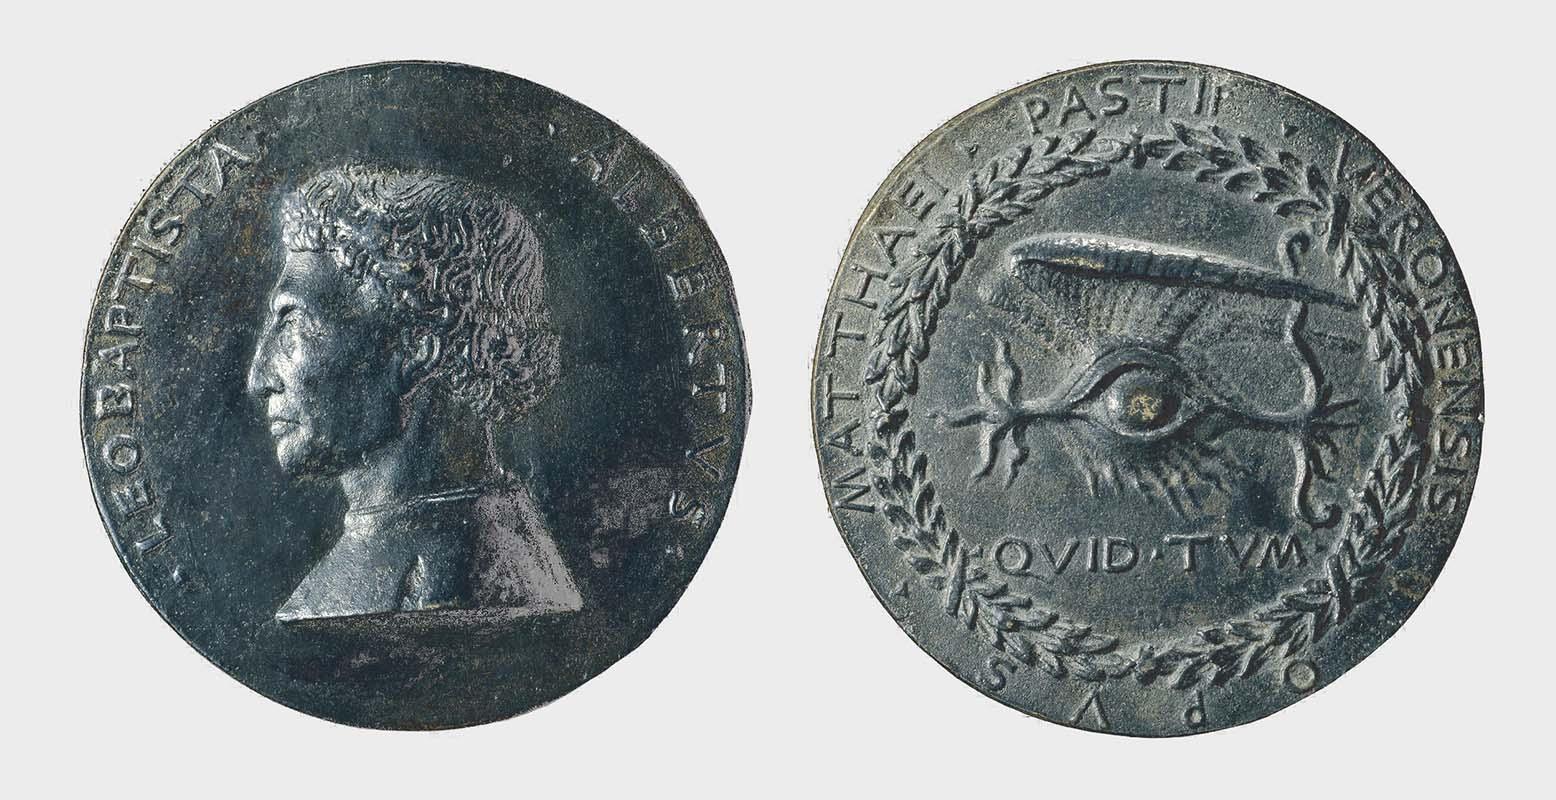 Medal with a bust of Leon Battista Alberti (obverse) and the allegory of a flaming winged eye surrounded by a laurel wreath (reverse), British Museum, London
